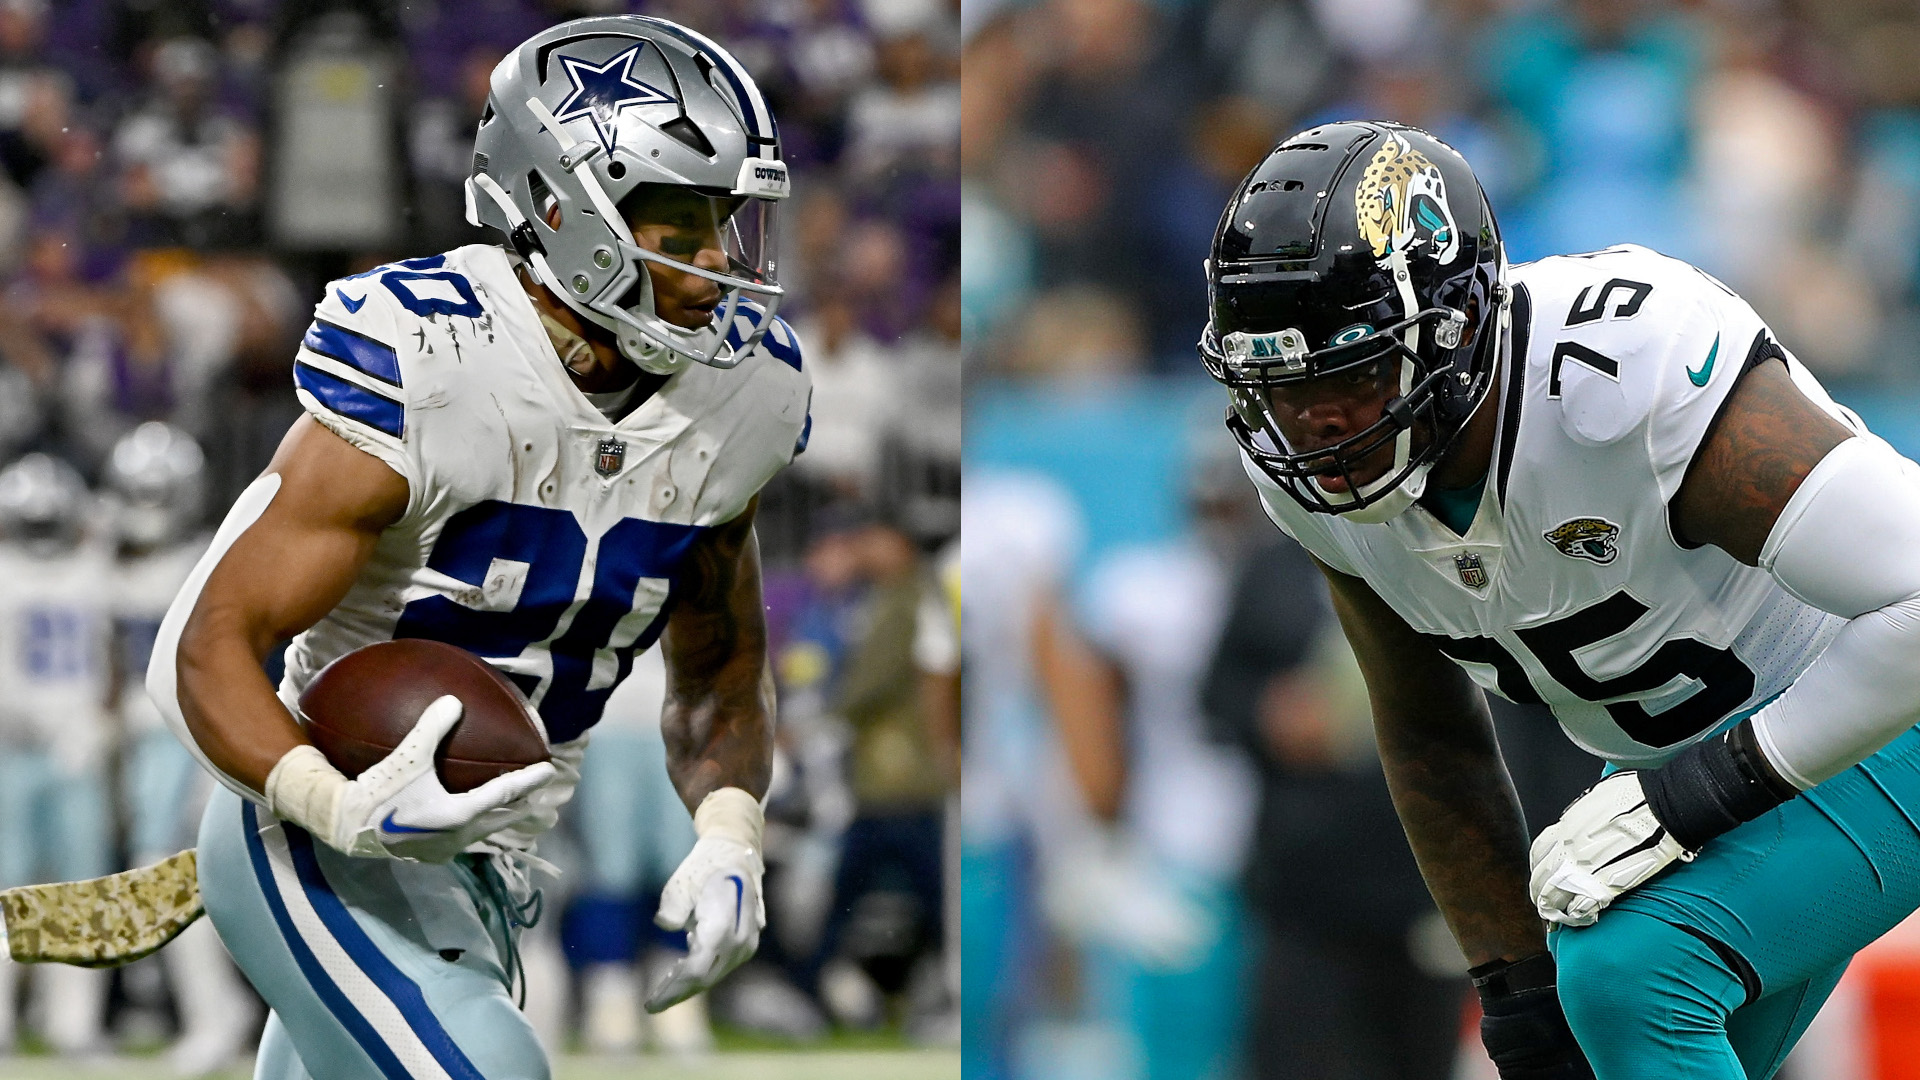 Cowboys vs Jaguars live stream: how to watch NFL online and on TV